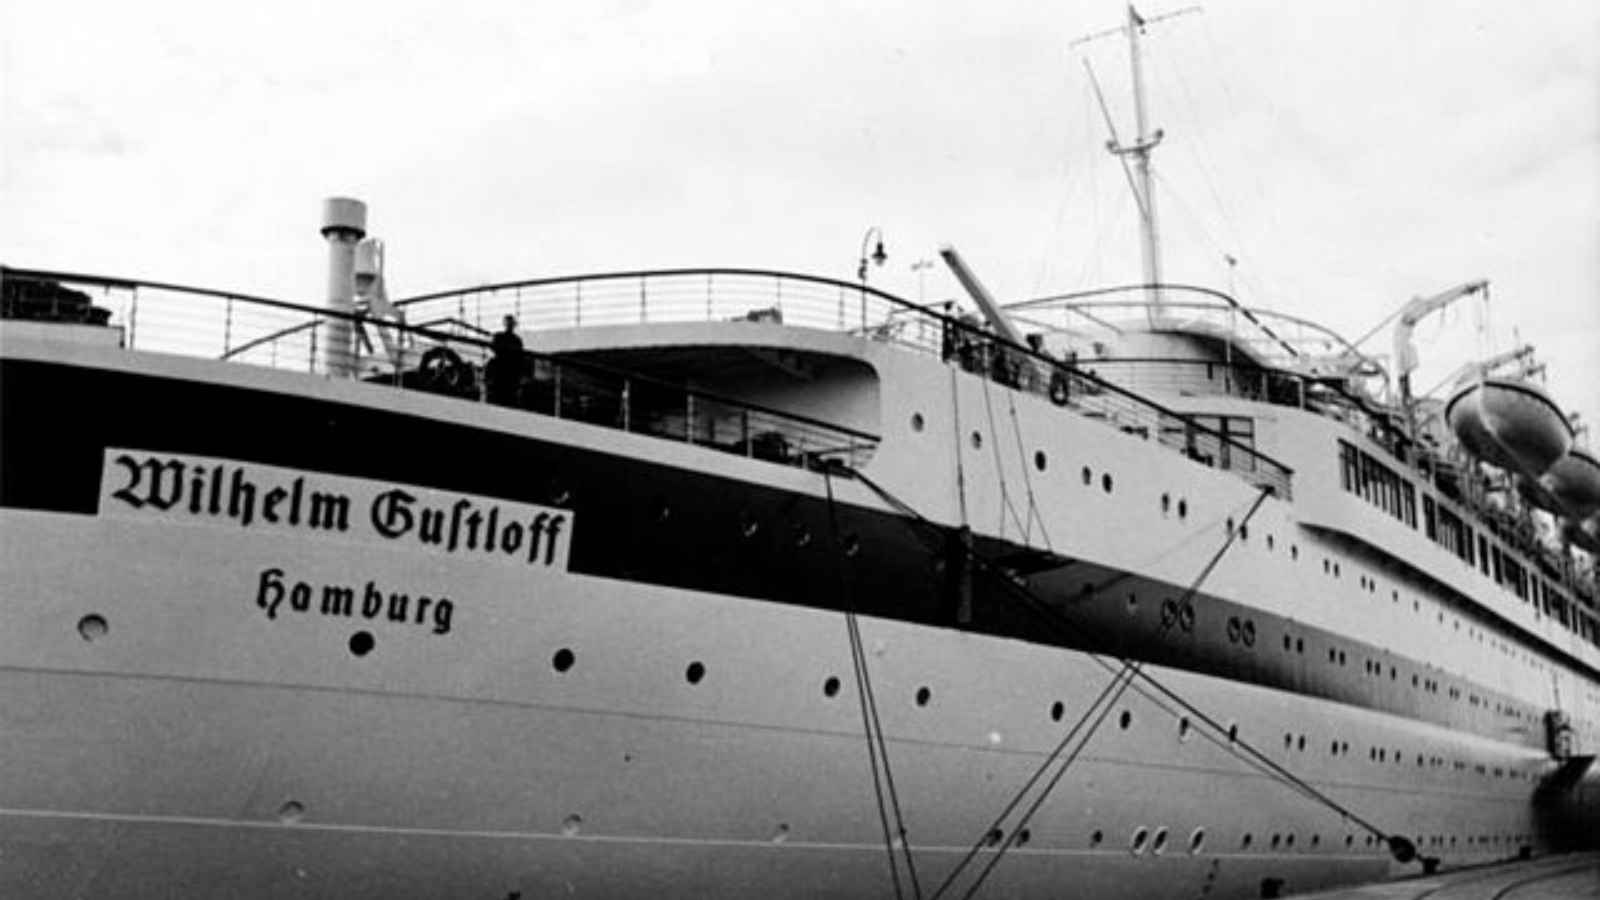 <p>During World War II, the German ship MV Wilhelm Gustloff was sunk by a Soviet submarine, resulting in the deaths of over 9,000 passengers and crew members. The majority of those on board were civilians fleeing from the advancing Red Army.</p><p>The MV Wilhelm Gustloff disaster was a result of wartime circumstances and poor decision-making by both sides. It also brought to light the tragedy of <a href="https://frenzhub.com/the-best-carnival-cruise-ships/">civilian casualties</a> in war and sparked debate over the legality of targeting civilian ships.</p>